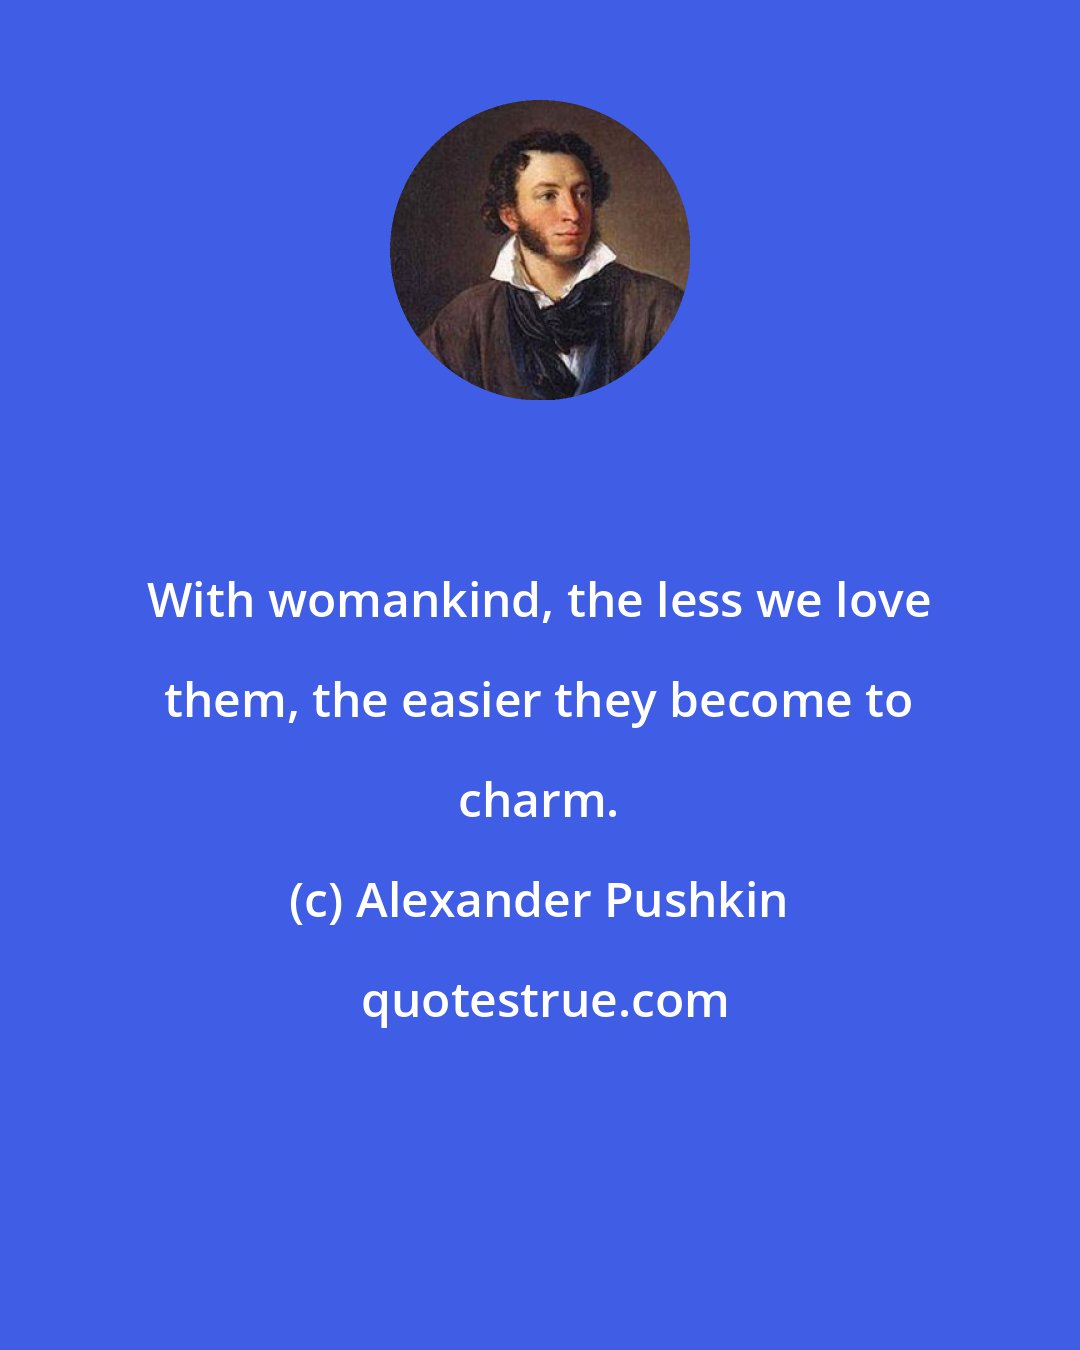 Alexander Pushkin: With womankind, the less we love them, the easier they become to charm.